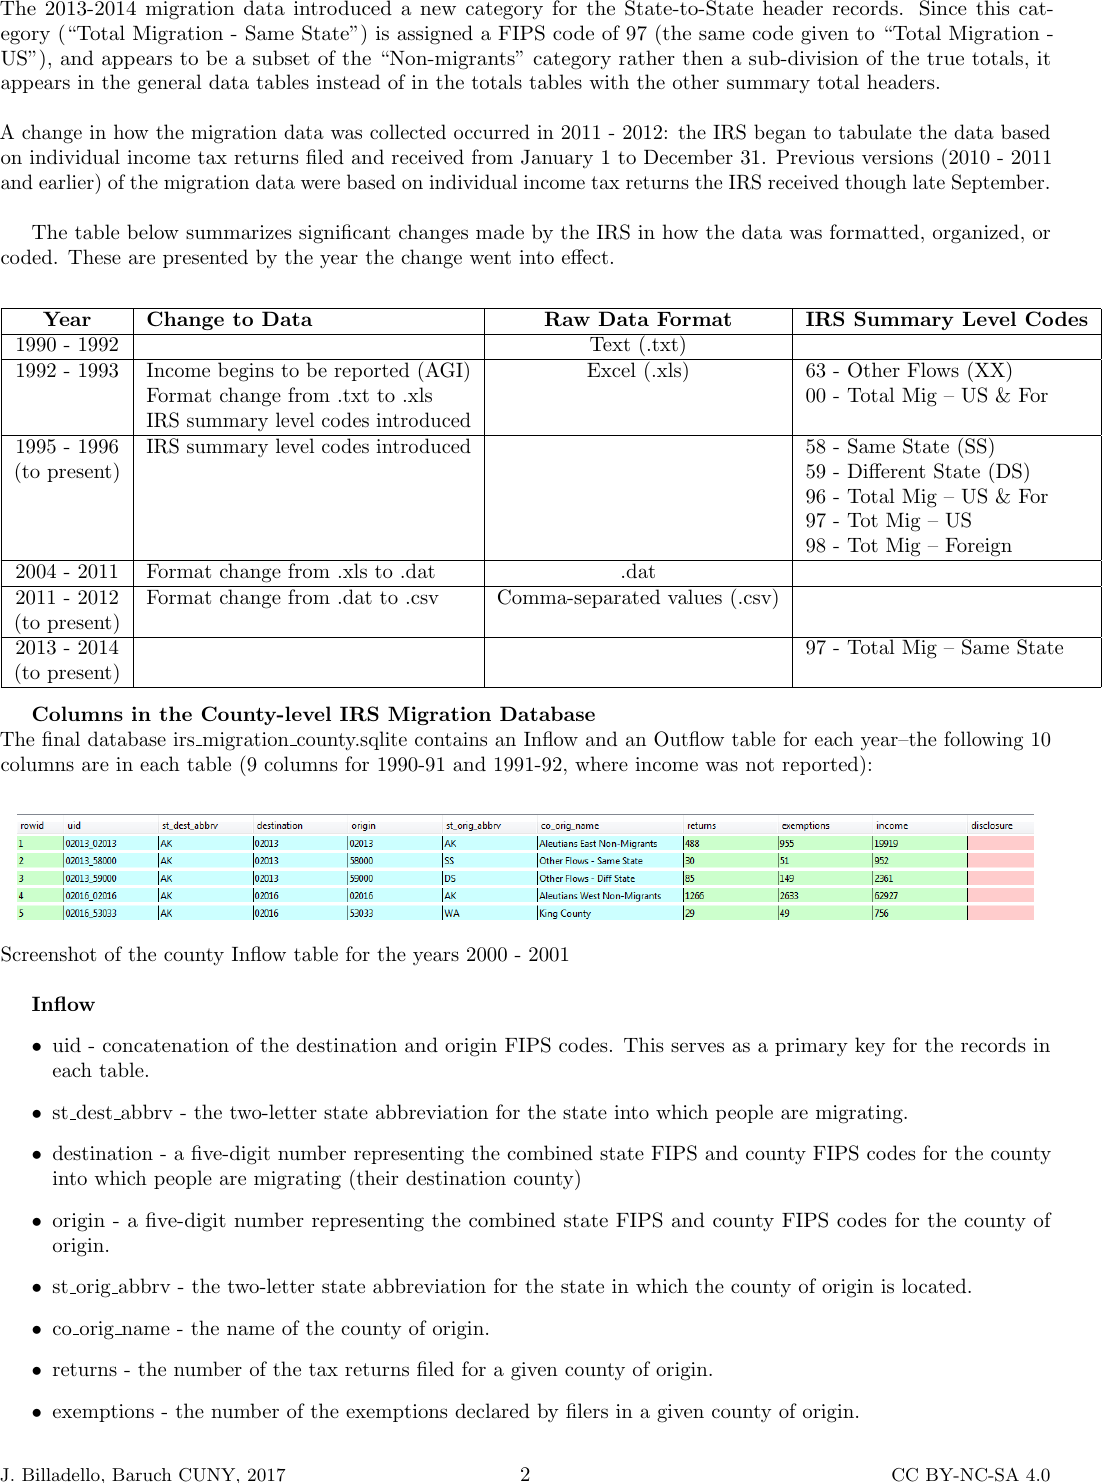 Page 2 of 5 - IRS Migration Database - User Summary Guide